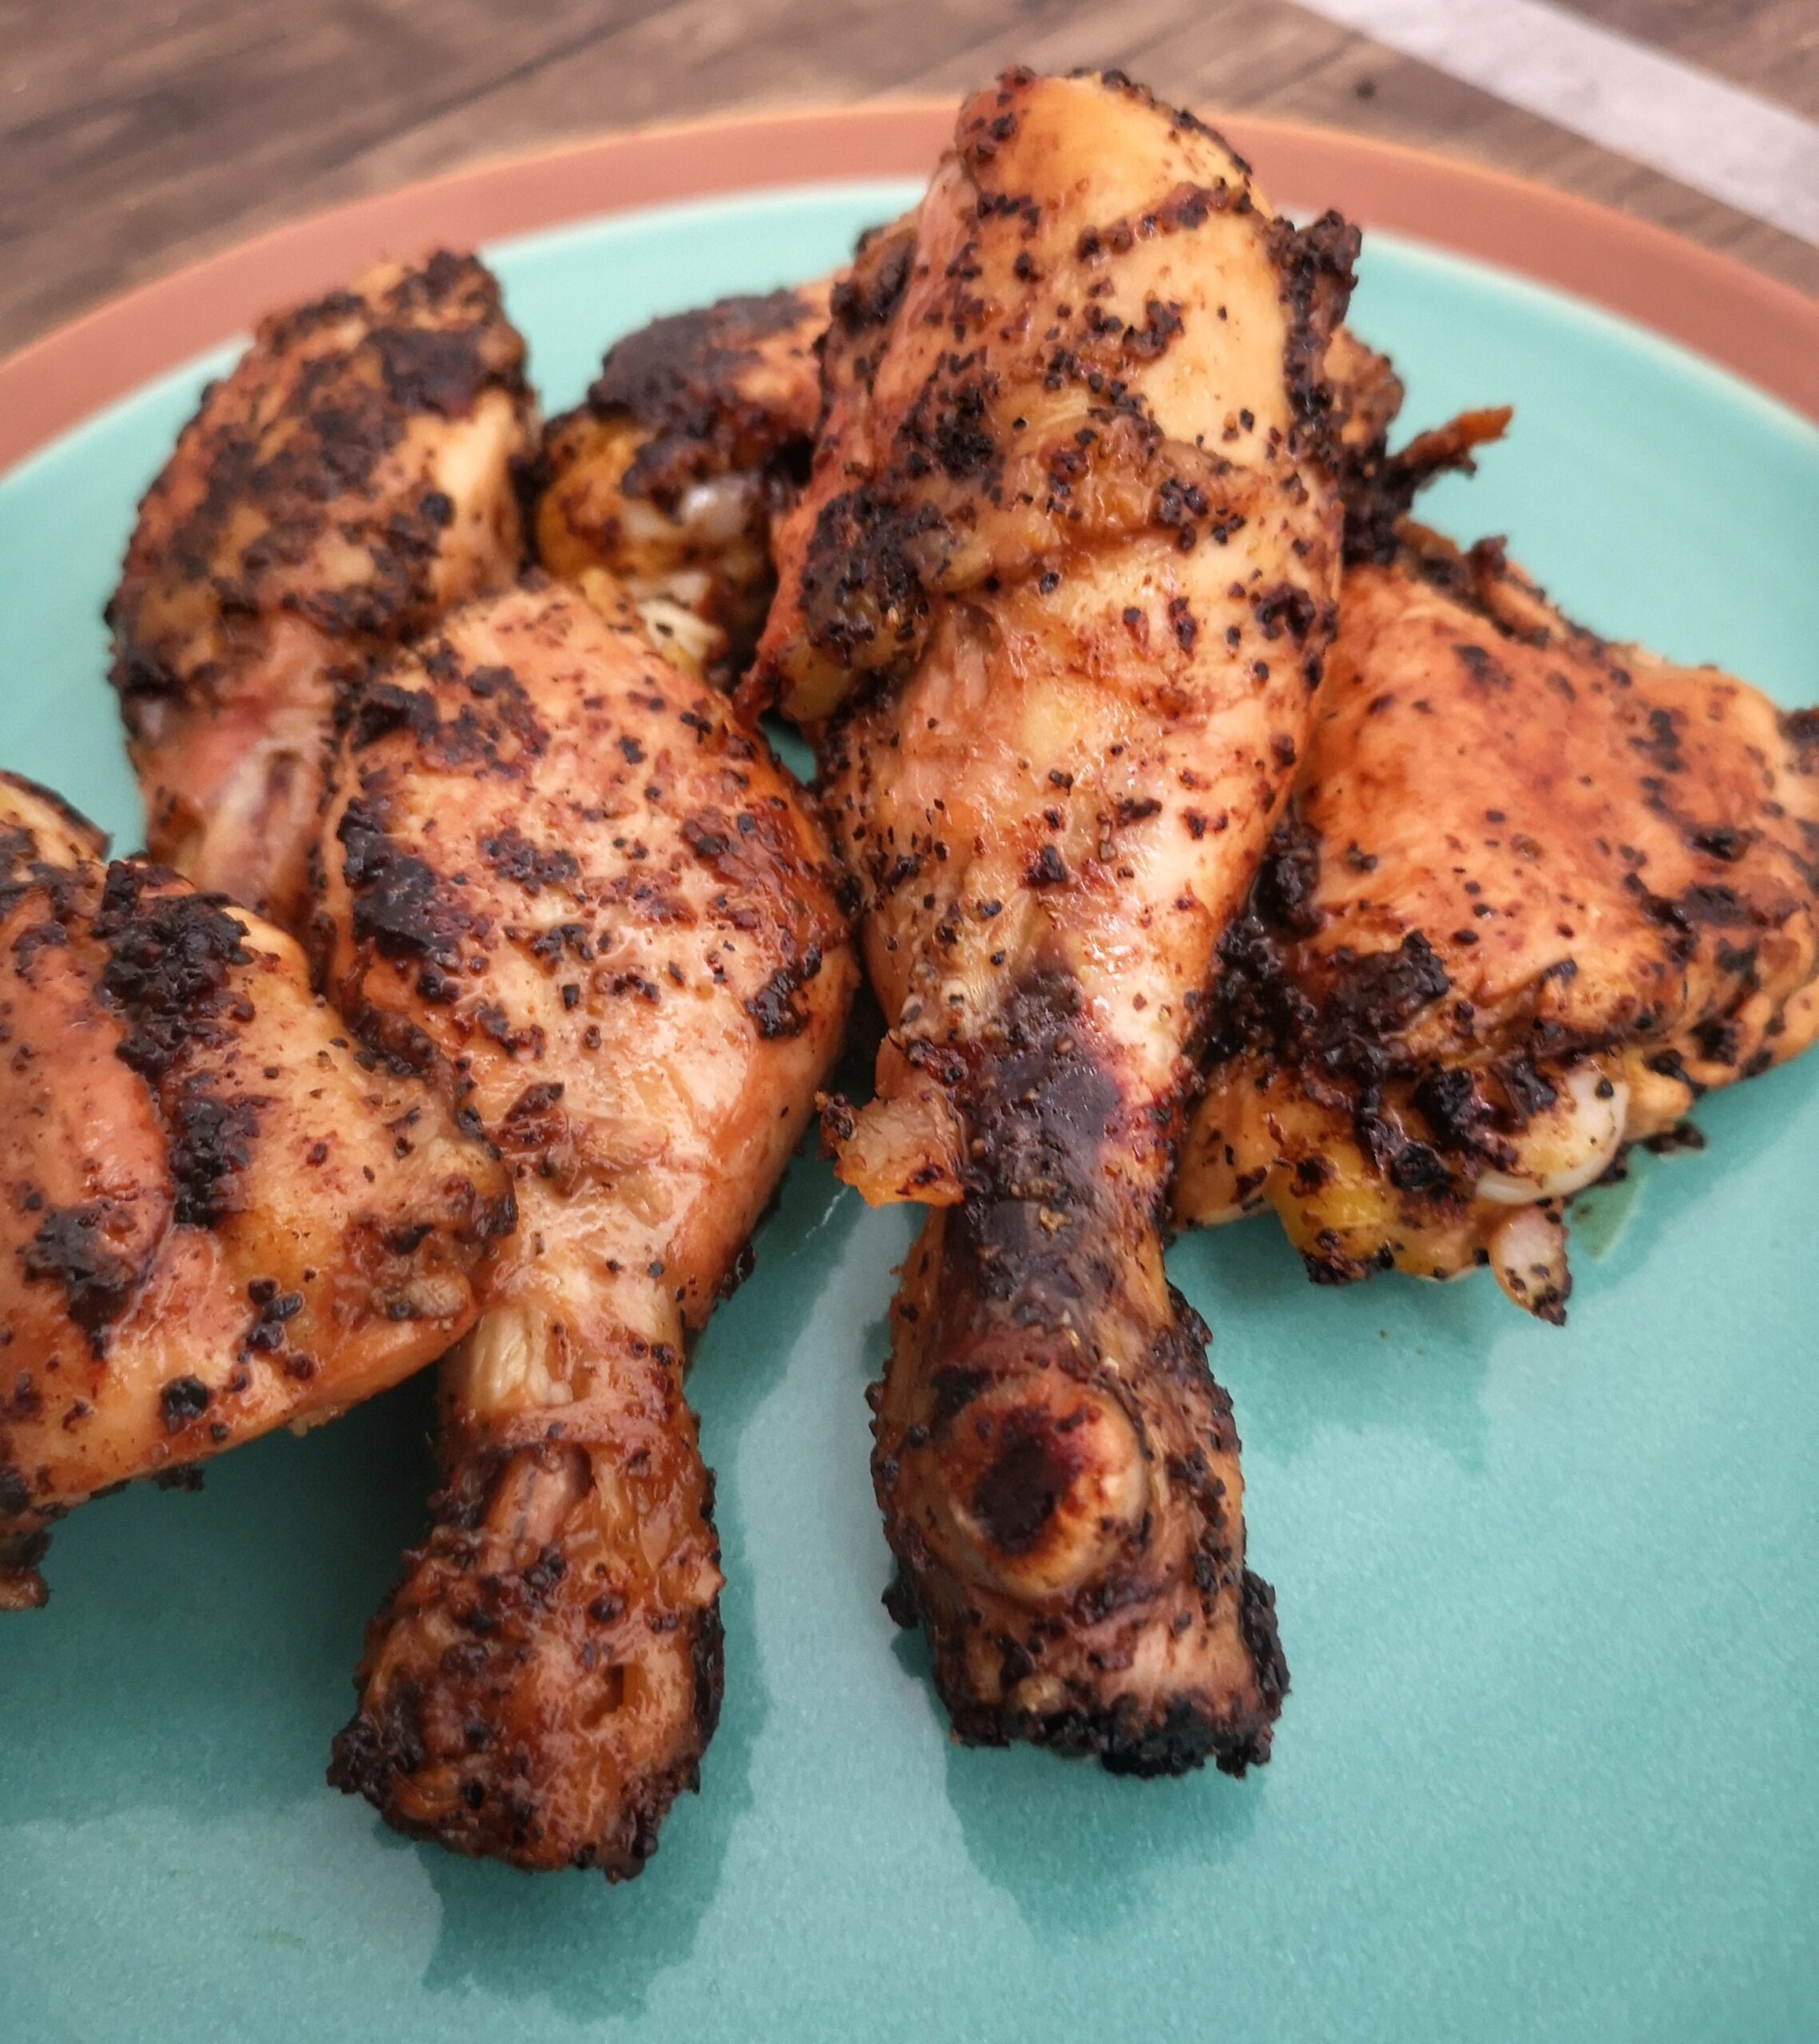 Lemon, Black Pepper, and Chicken. Add salt as per tatse. Baste regularly while roasting to get the charring, which is a delicious tangy crunch. 